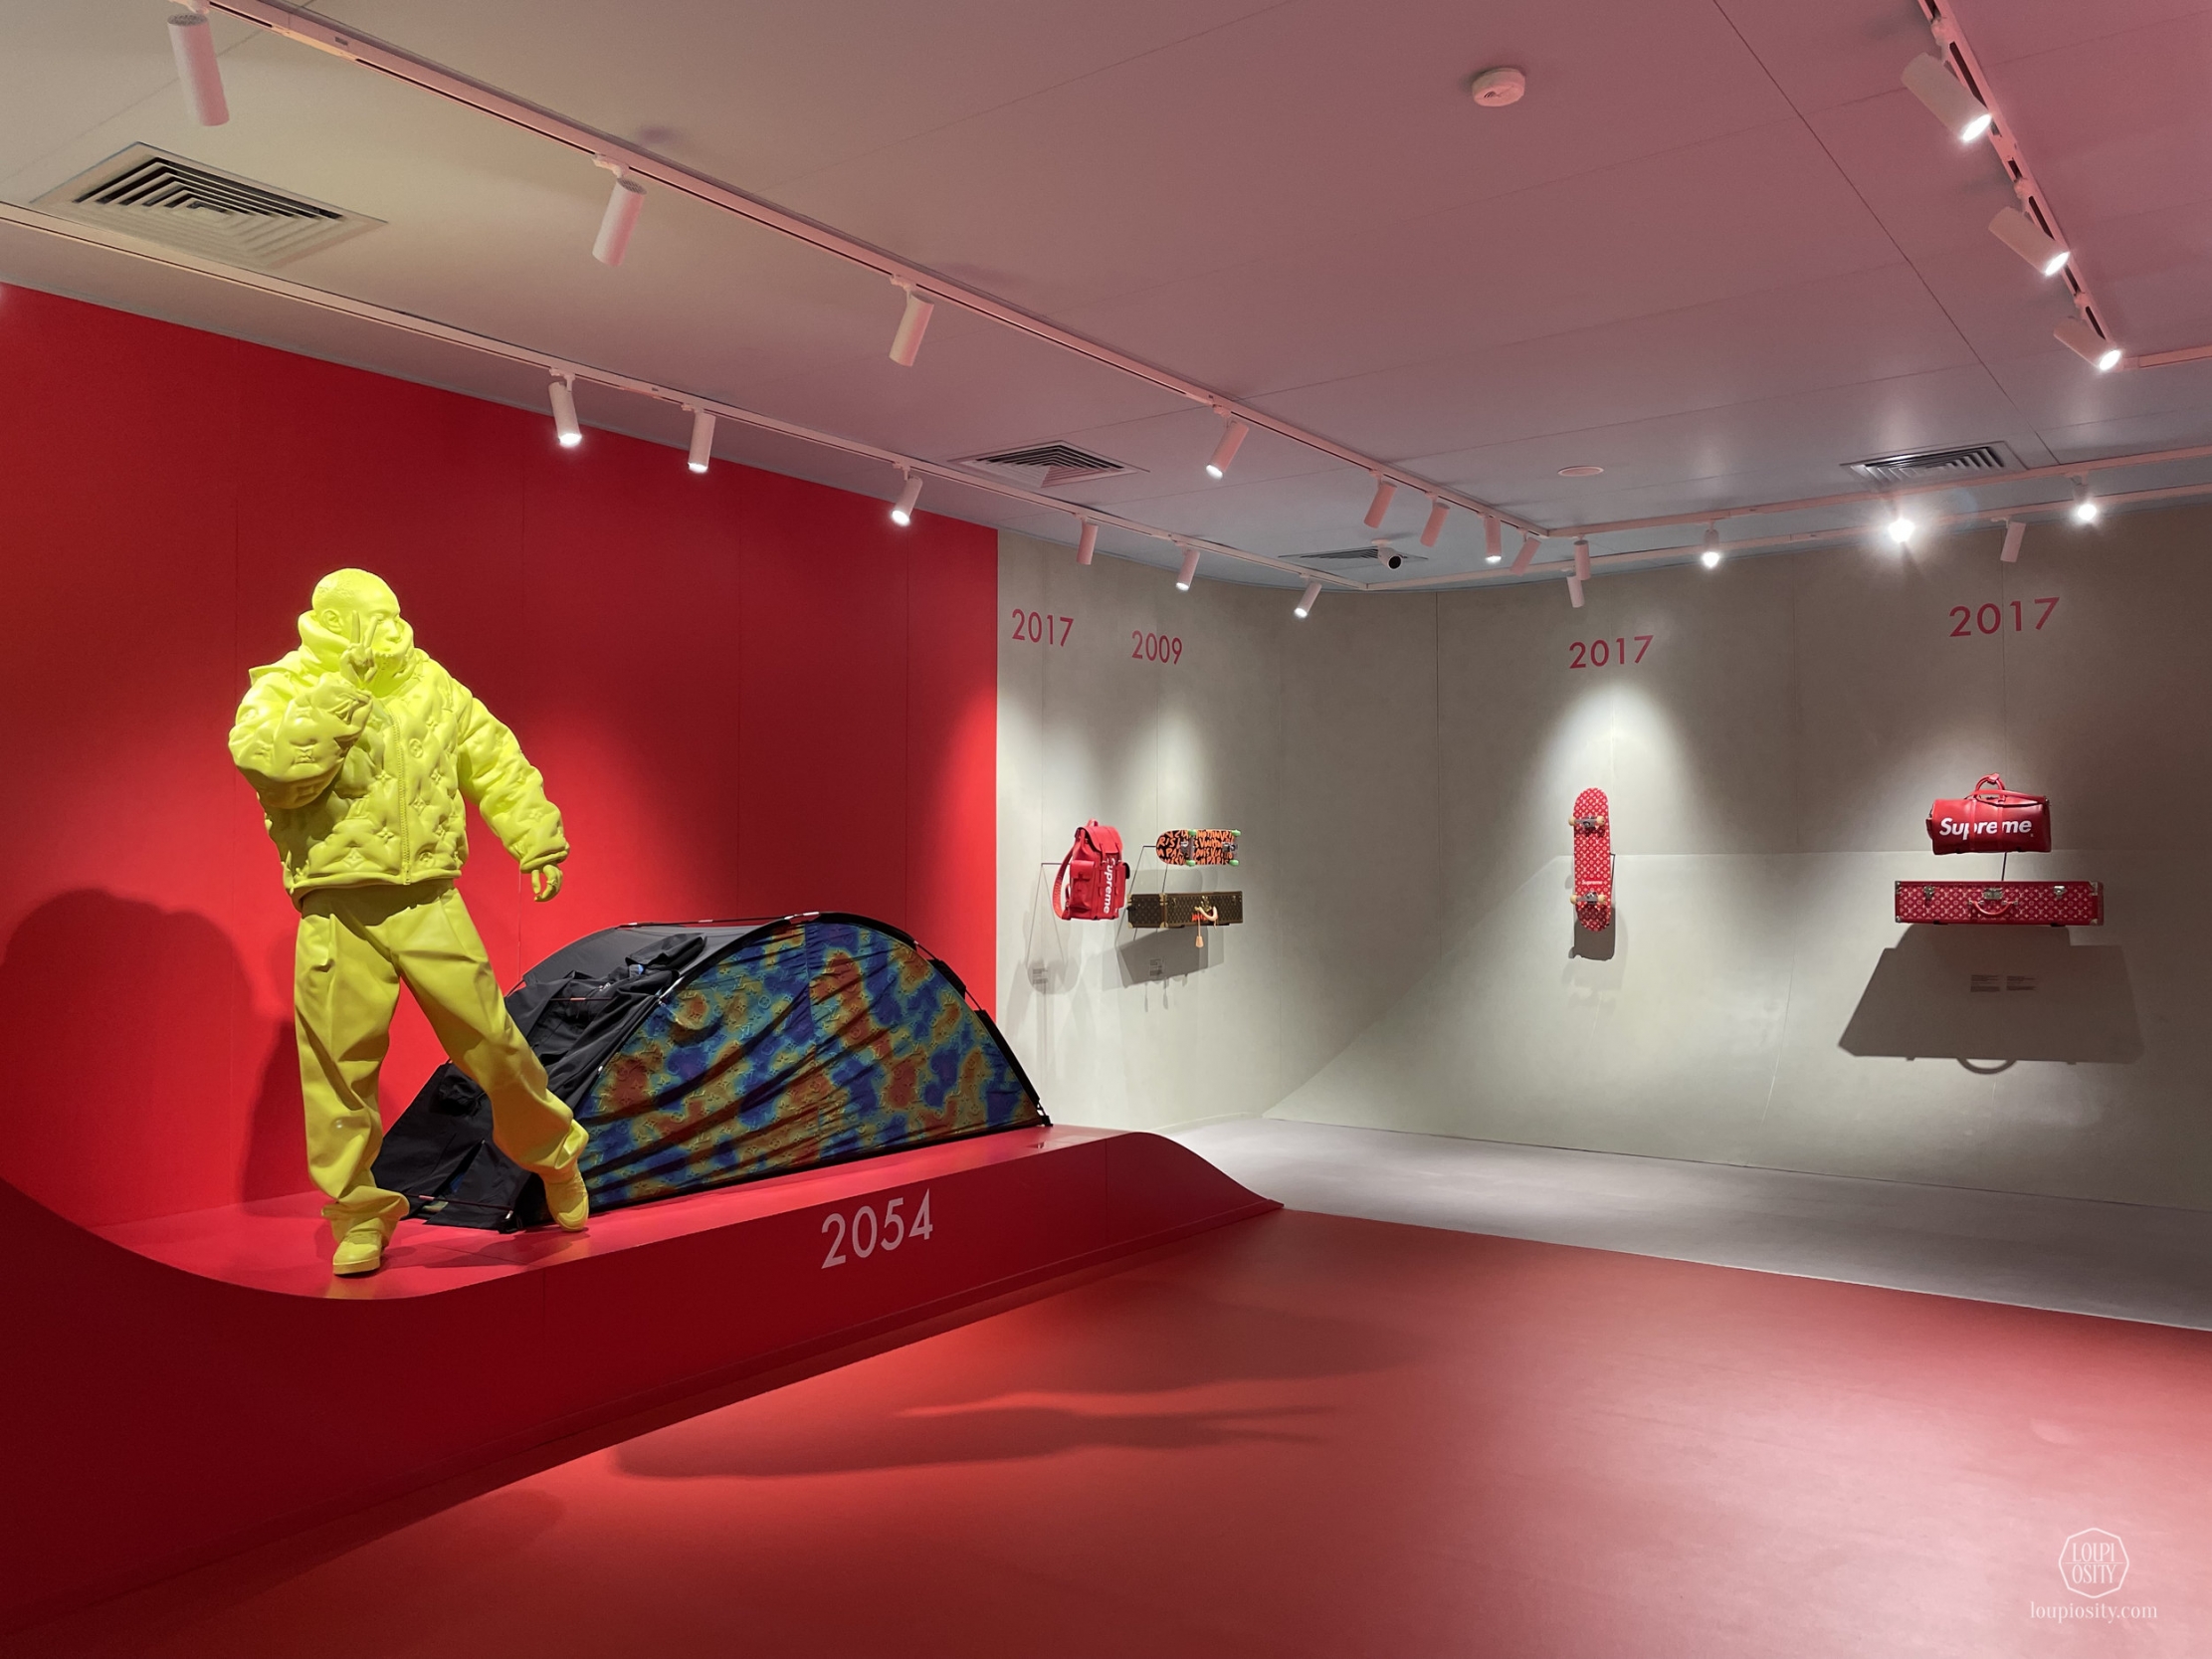 The Louis Vuitton SEE LV Exhibition Is Coming To Dubai - MOJEH